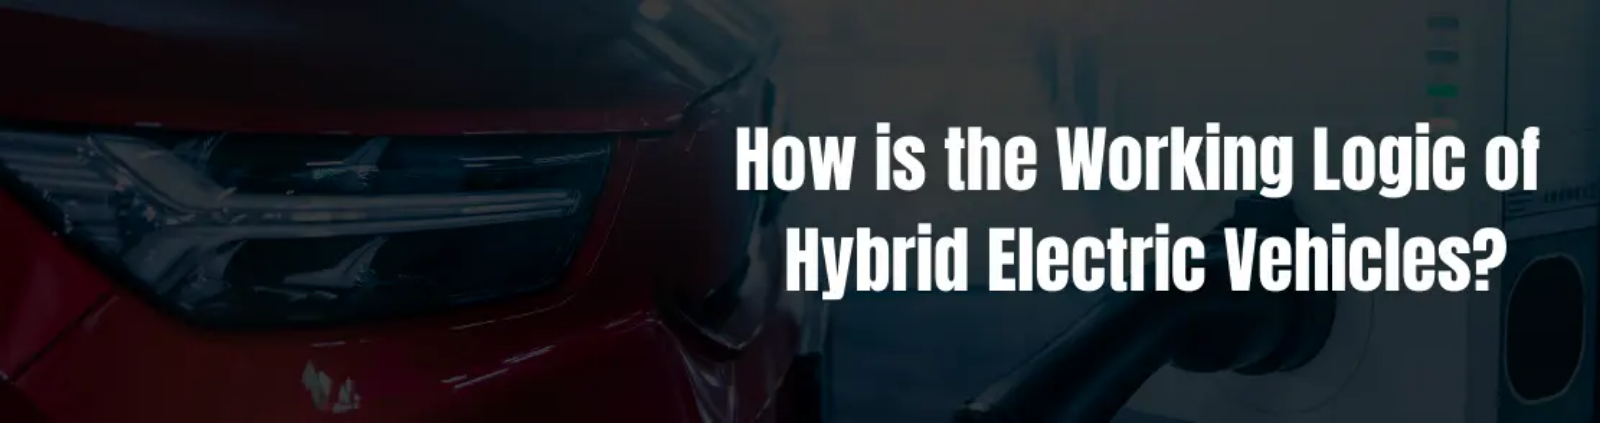 How do hybrid electric vehicles work?